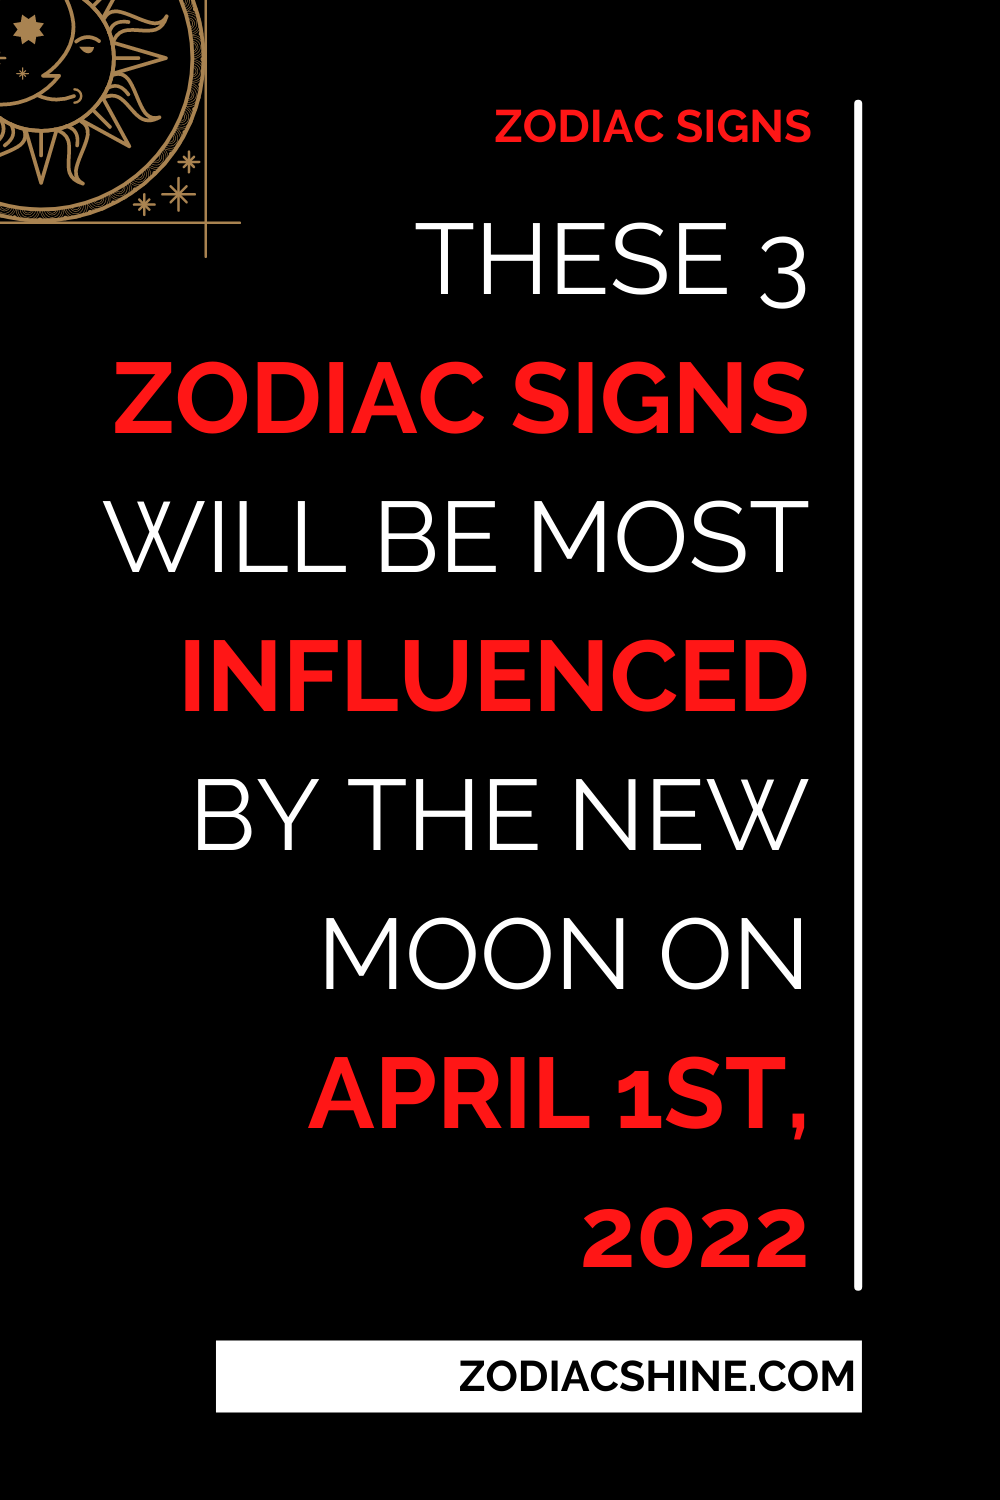 These 3 zodiac signs will be most influenced by the new moon on April 1st 2022